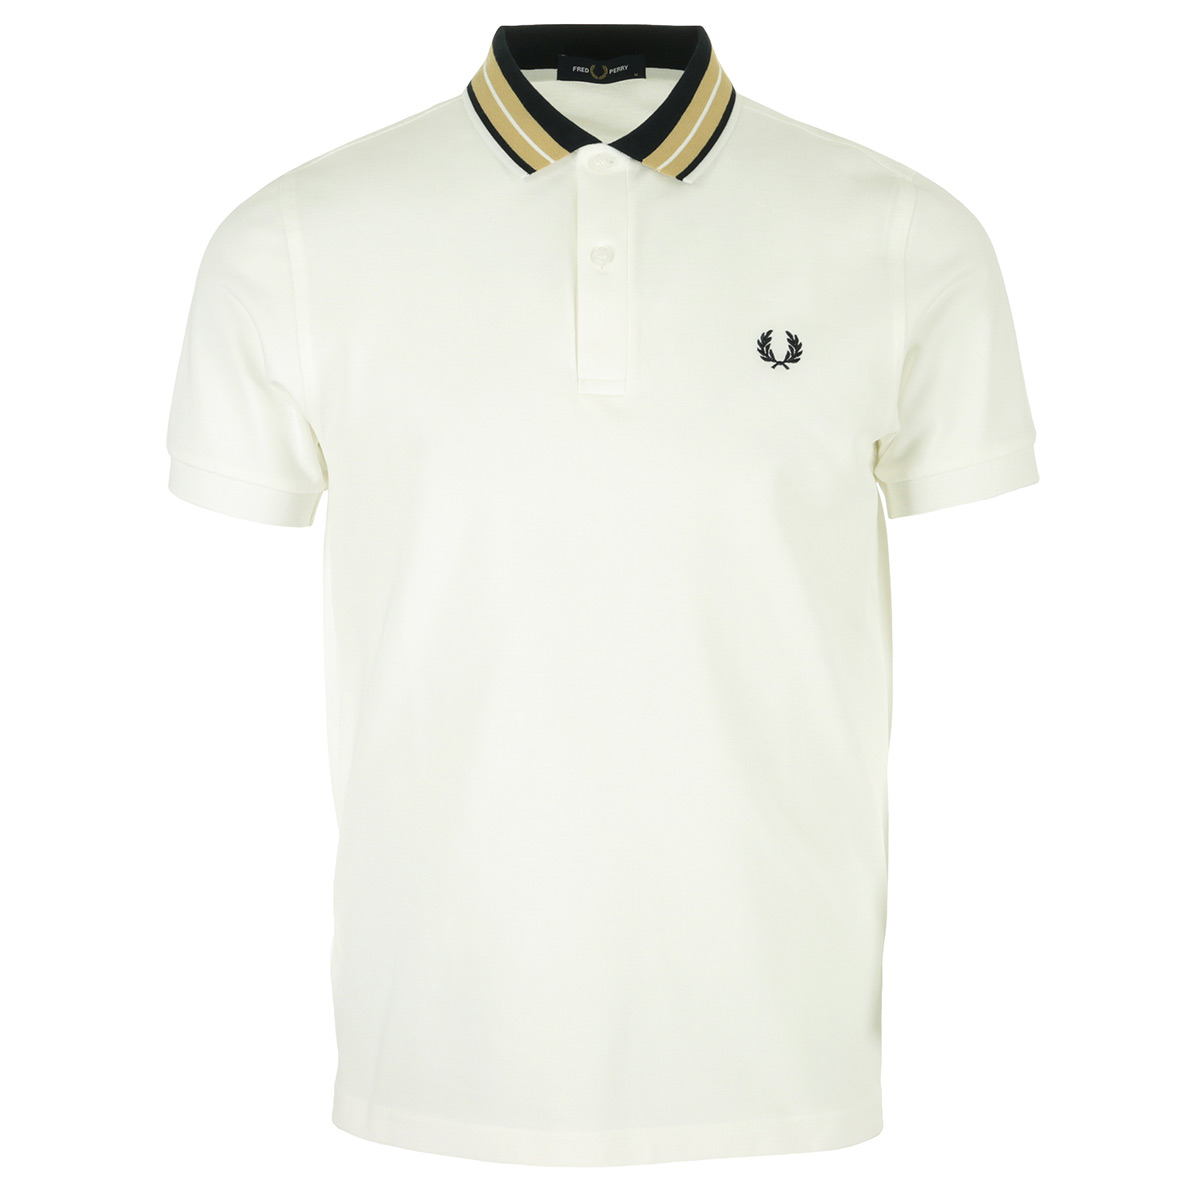 Fred Perry "Tramline Tipped Polo Shirt"